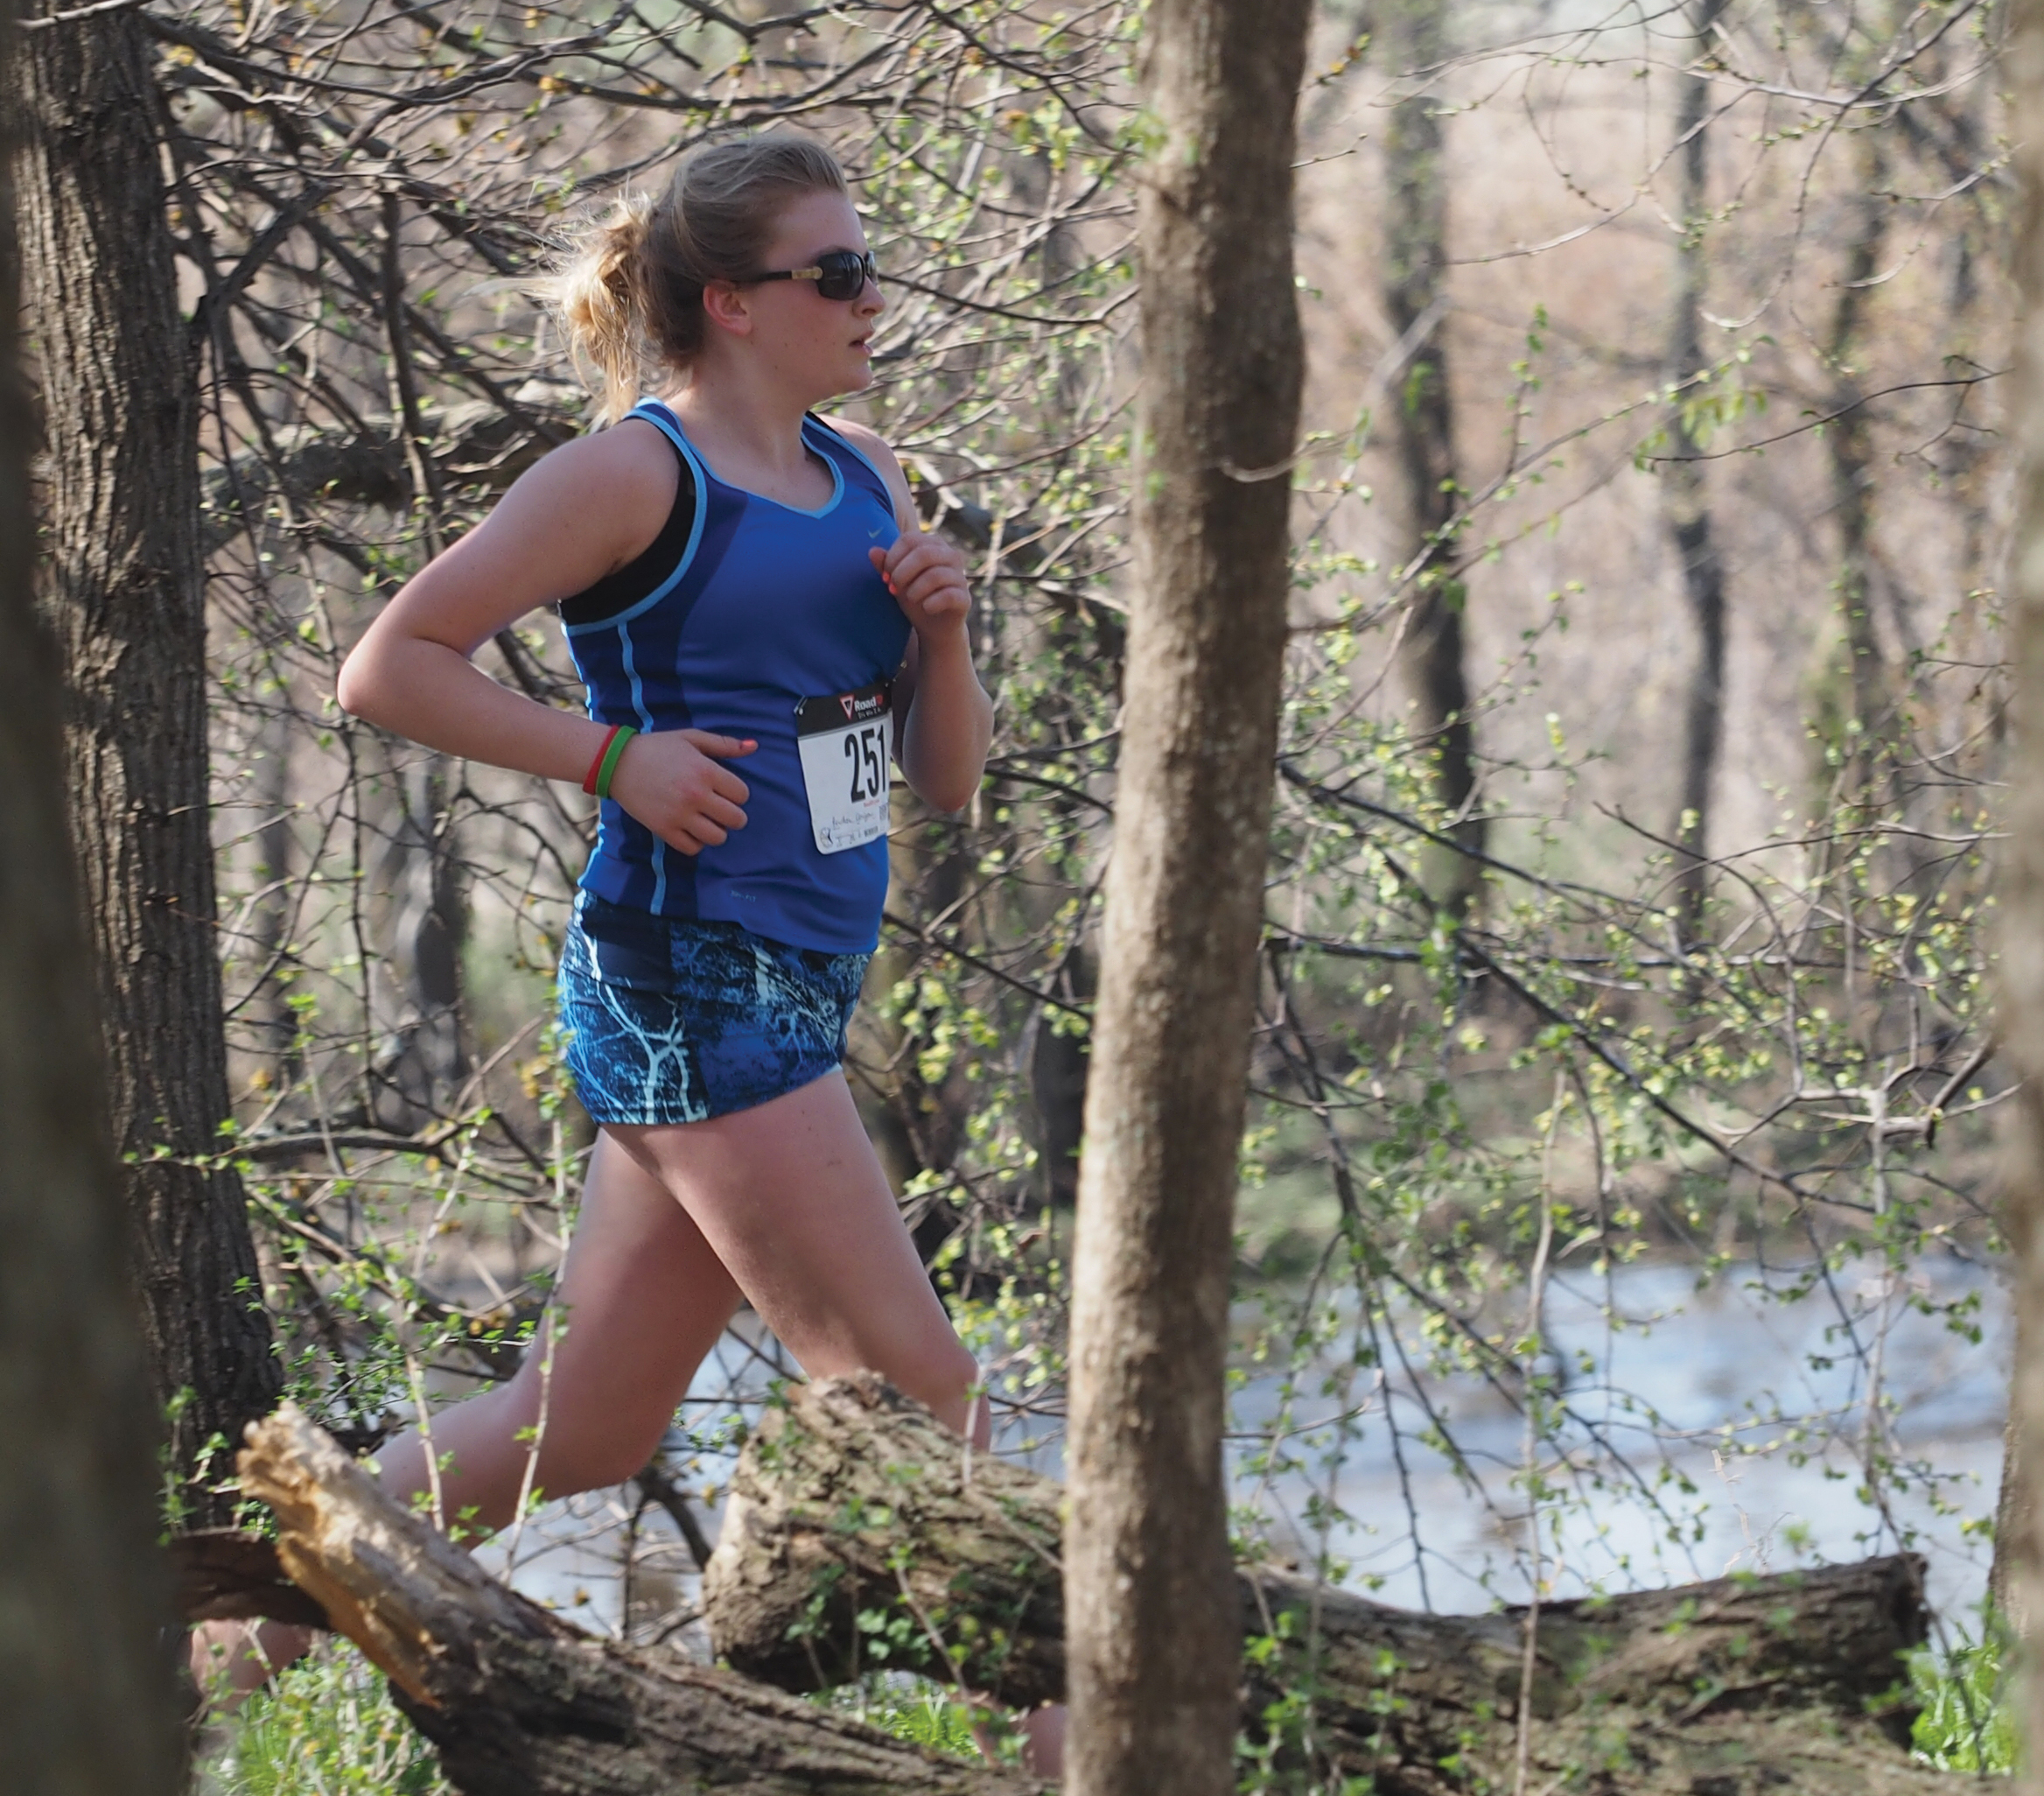 Tosanak 5K Trail Run features park in spring bloom